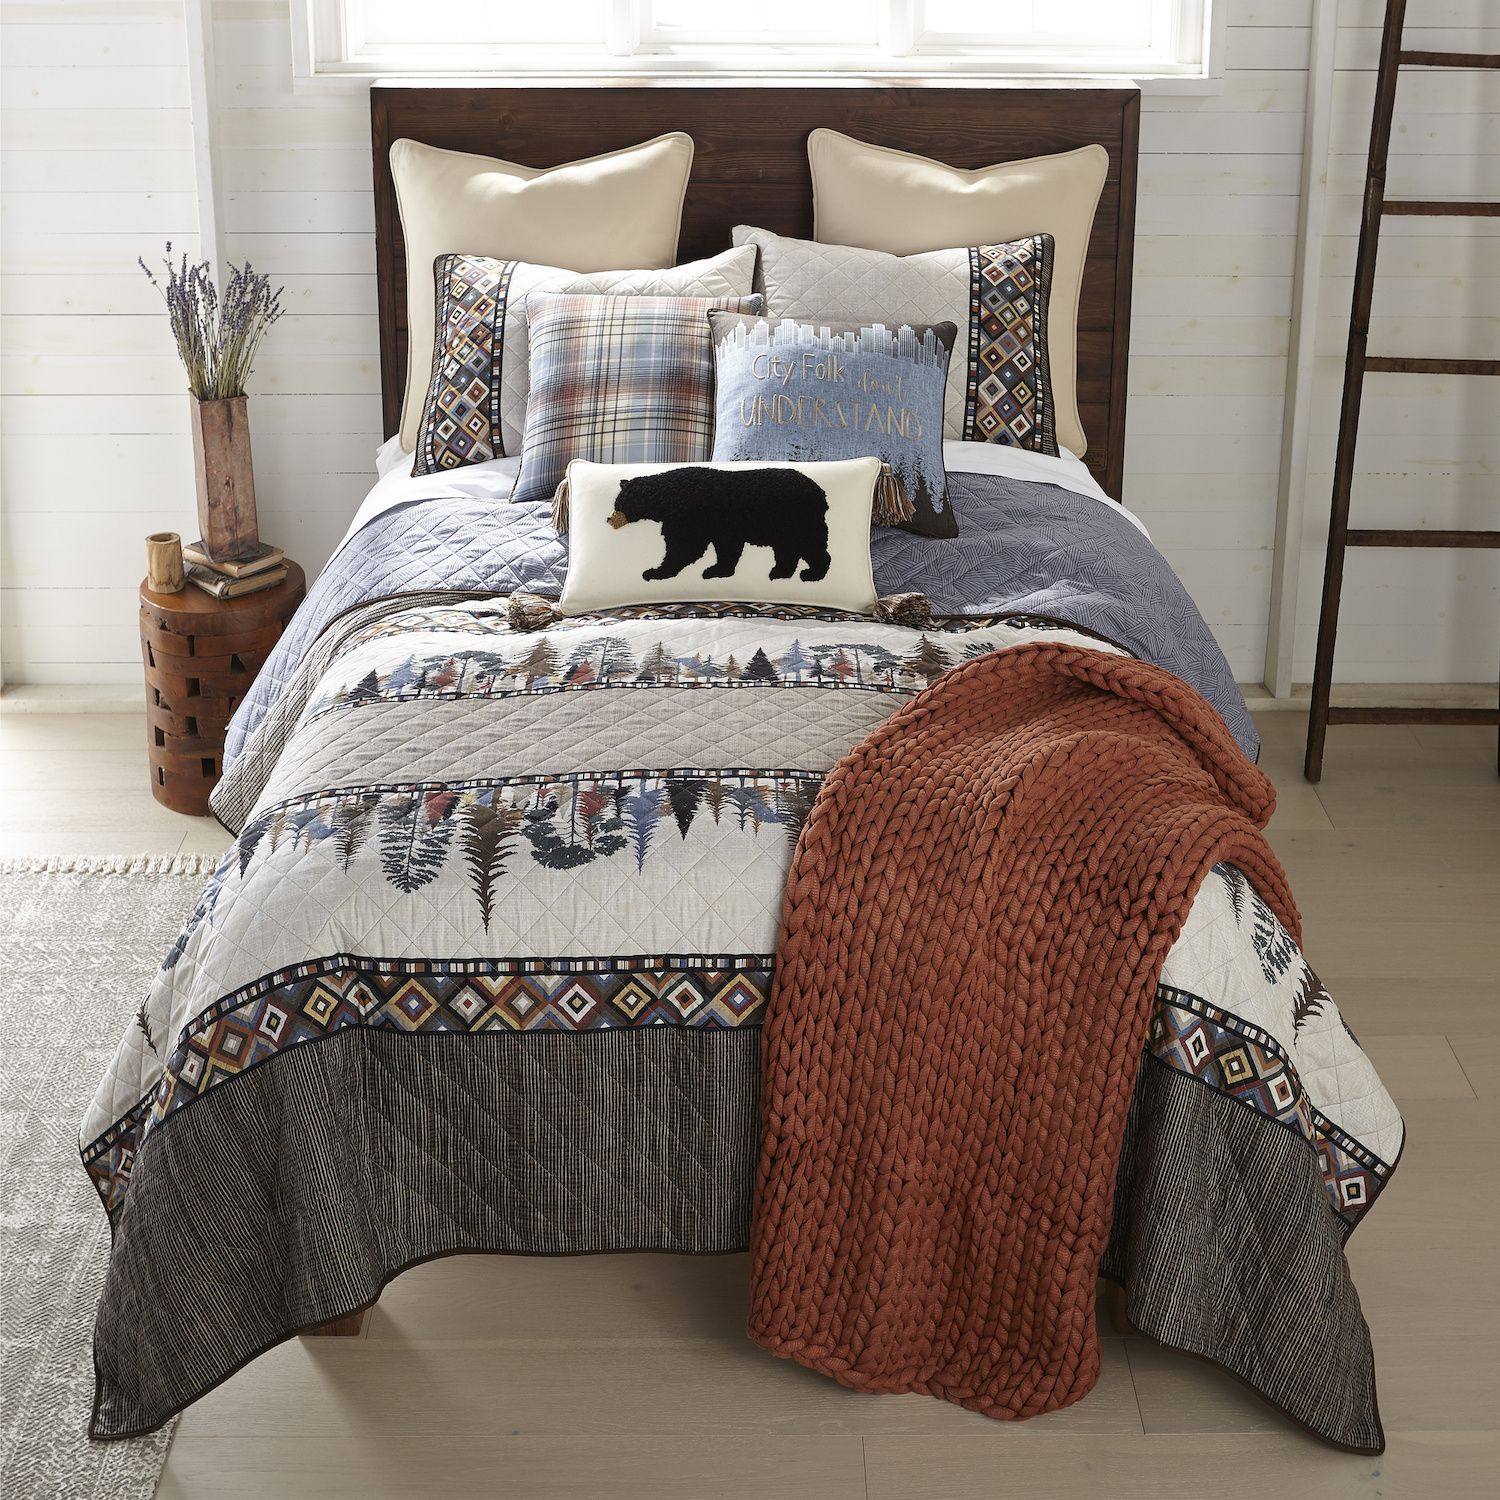 Image for Donna Sharp Retro Forest Quilt Set with Shams at Kohl's.